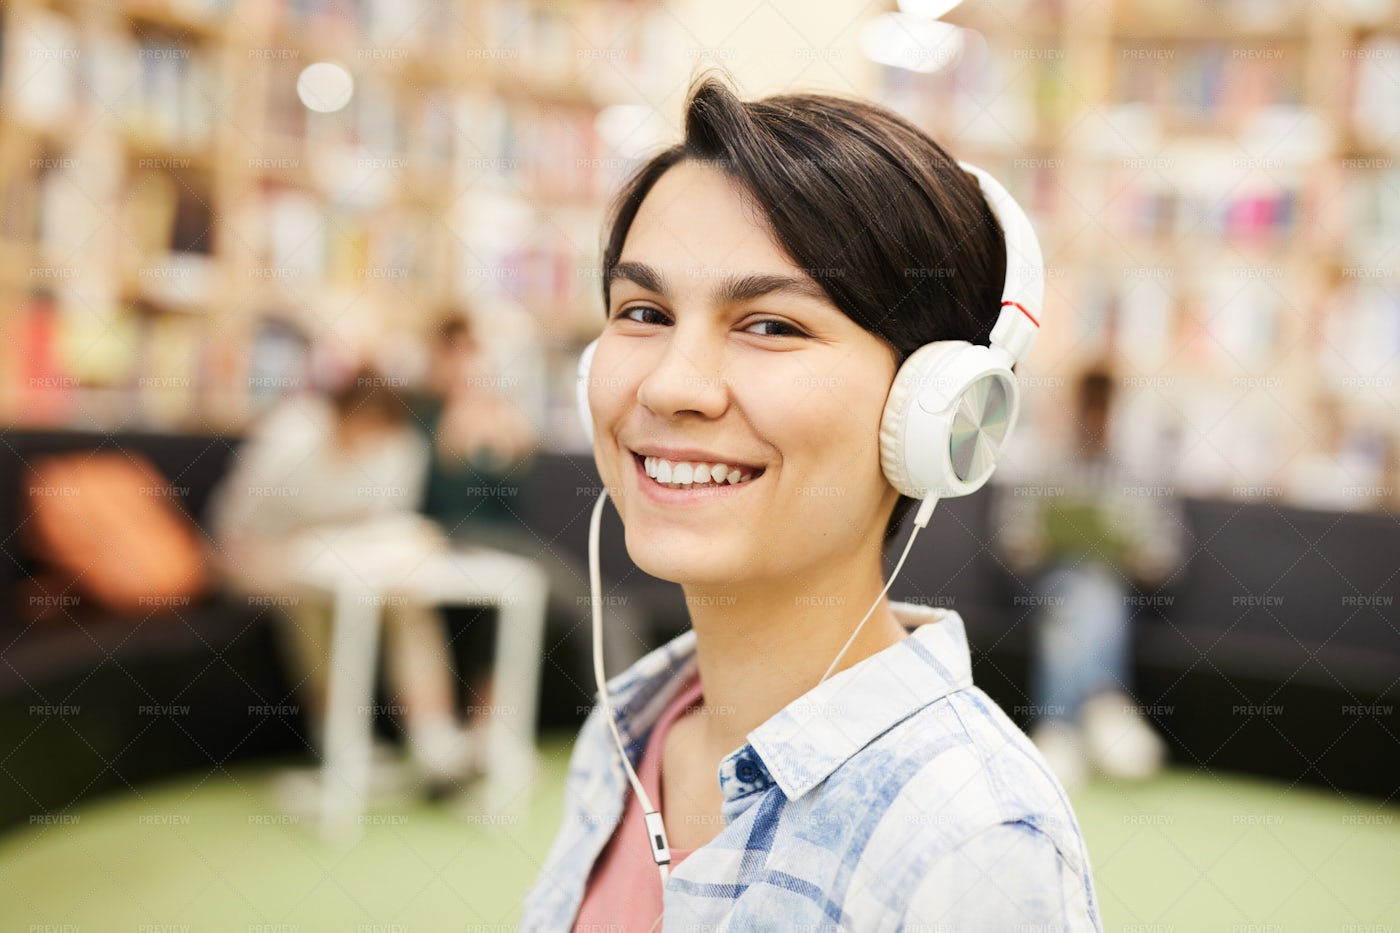 Smiling Girl Listening To Audiobook...: Stock Photos